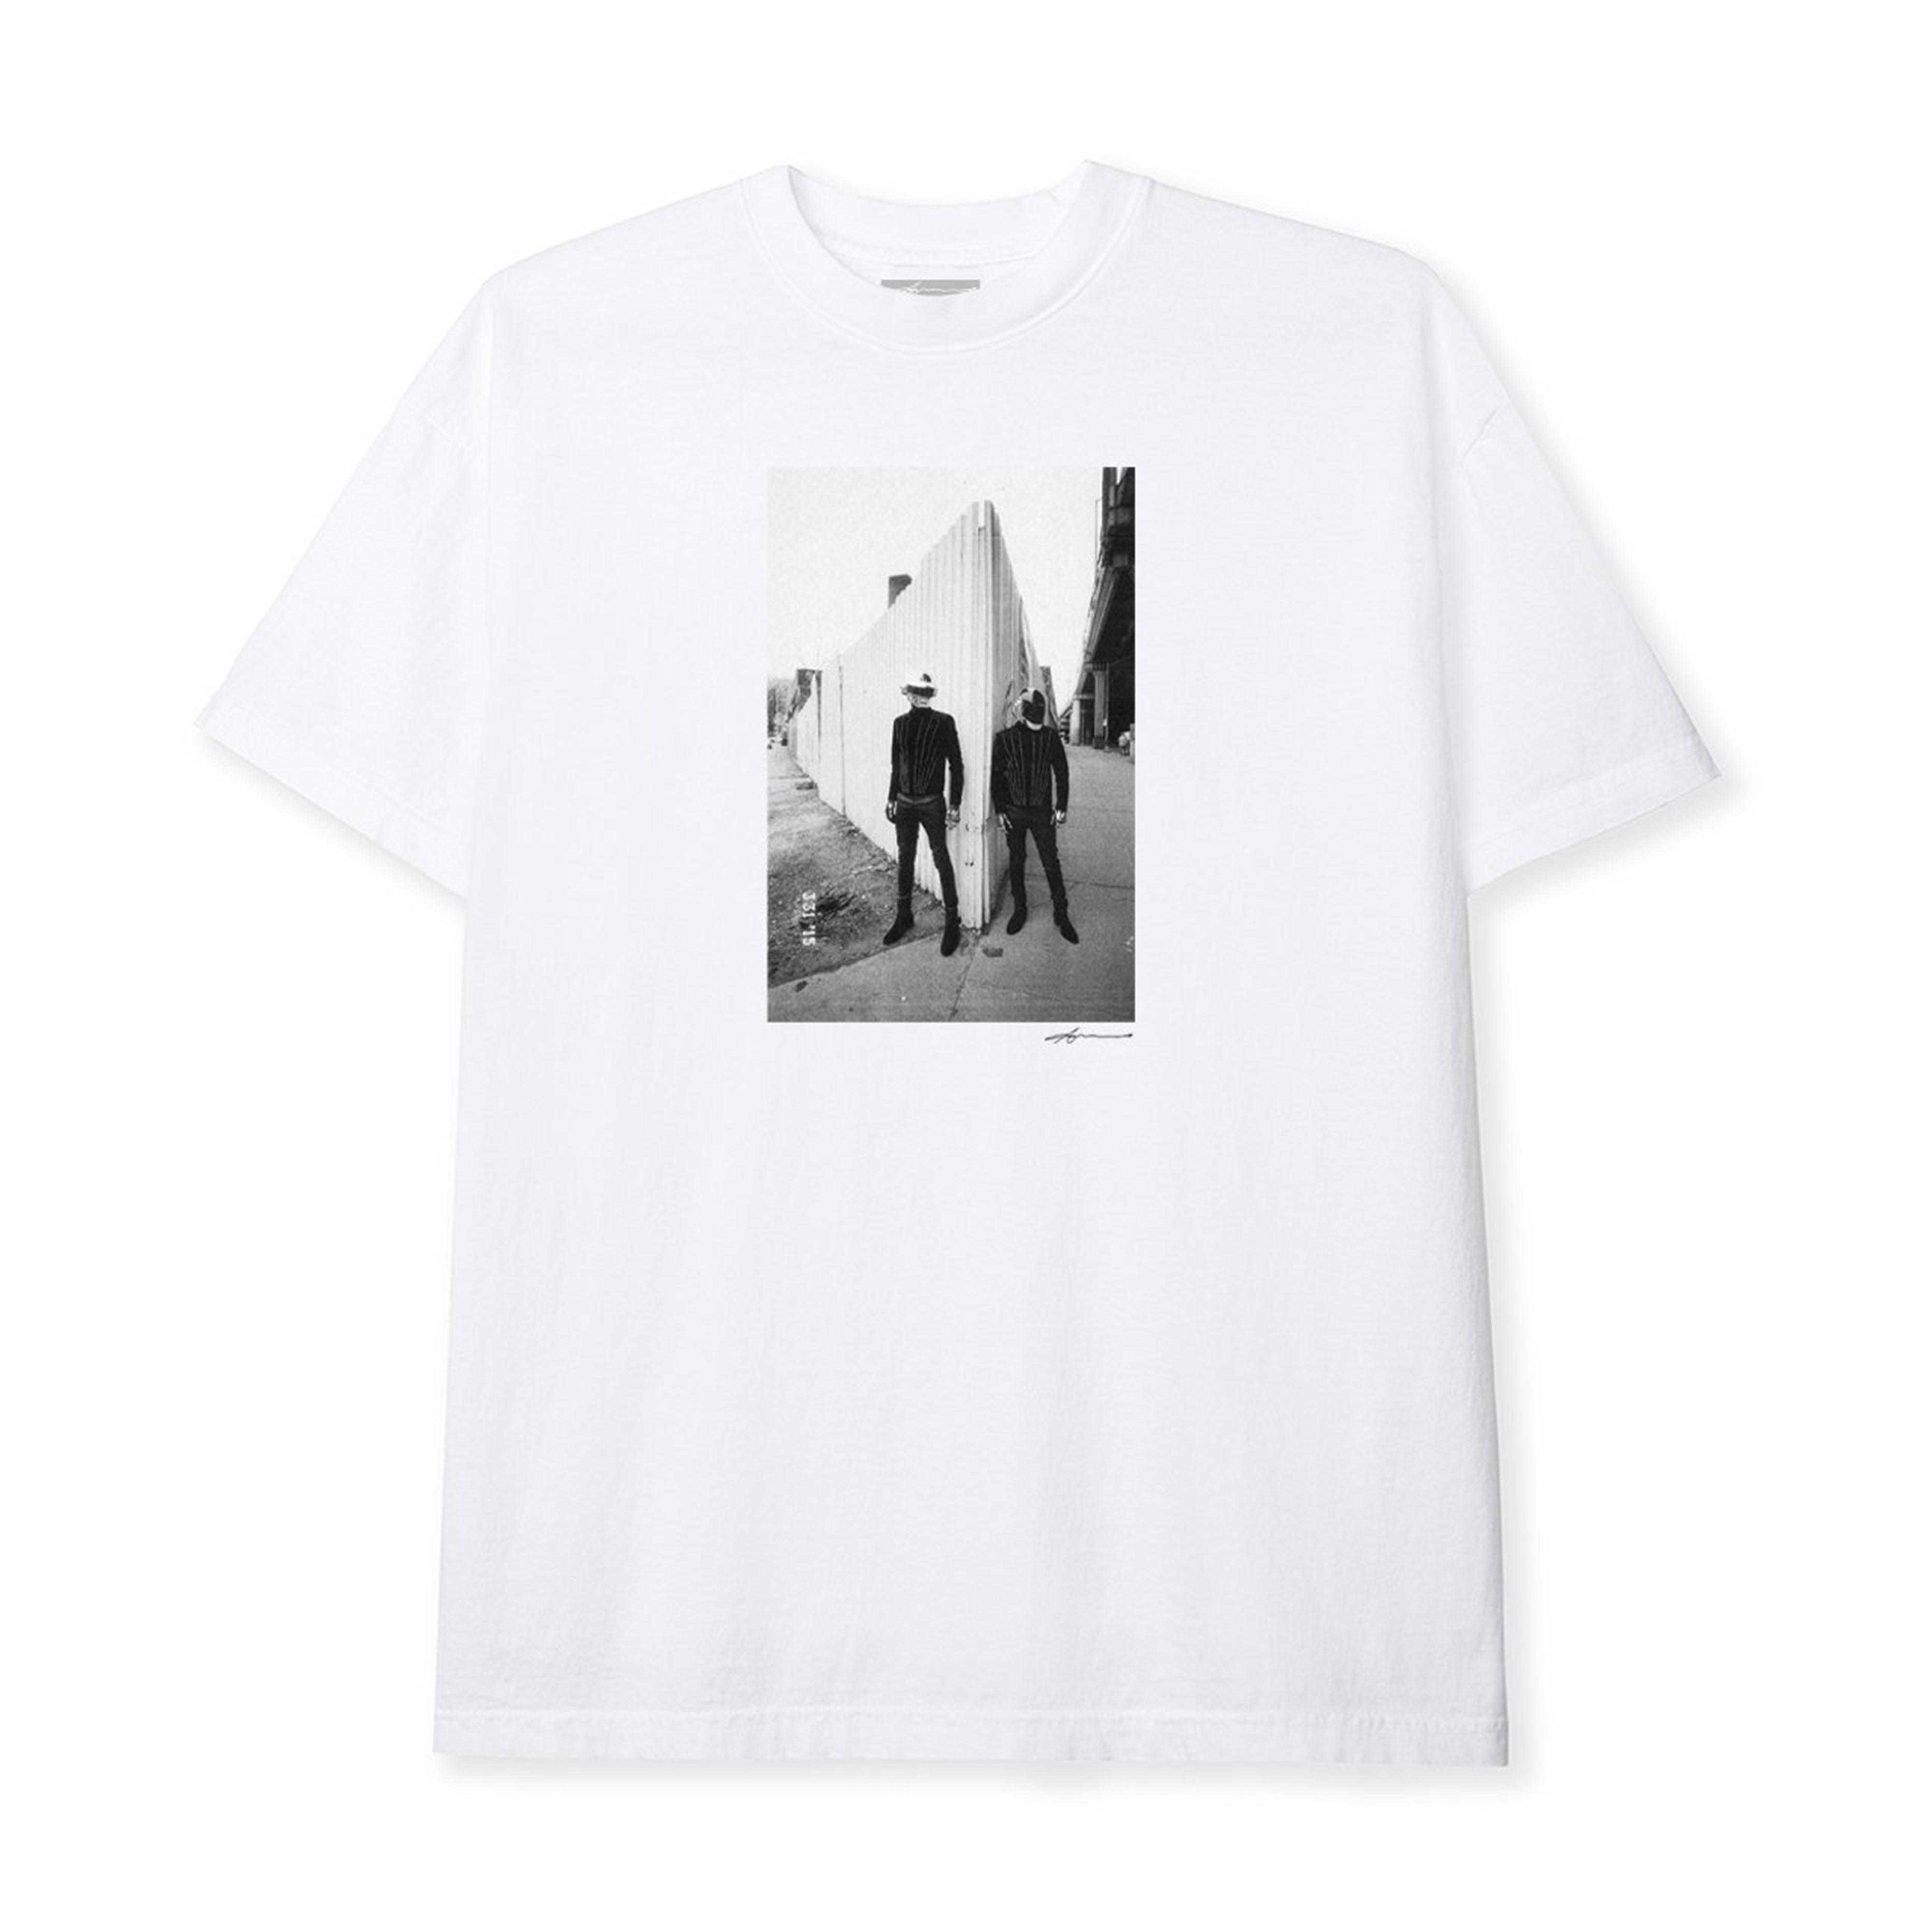 Ari Marcopoulos Daft Punk T-Shirt (White) by ARI MARCOPOULOS